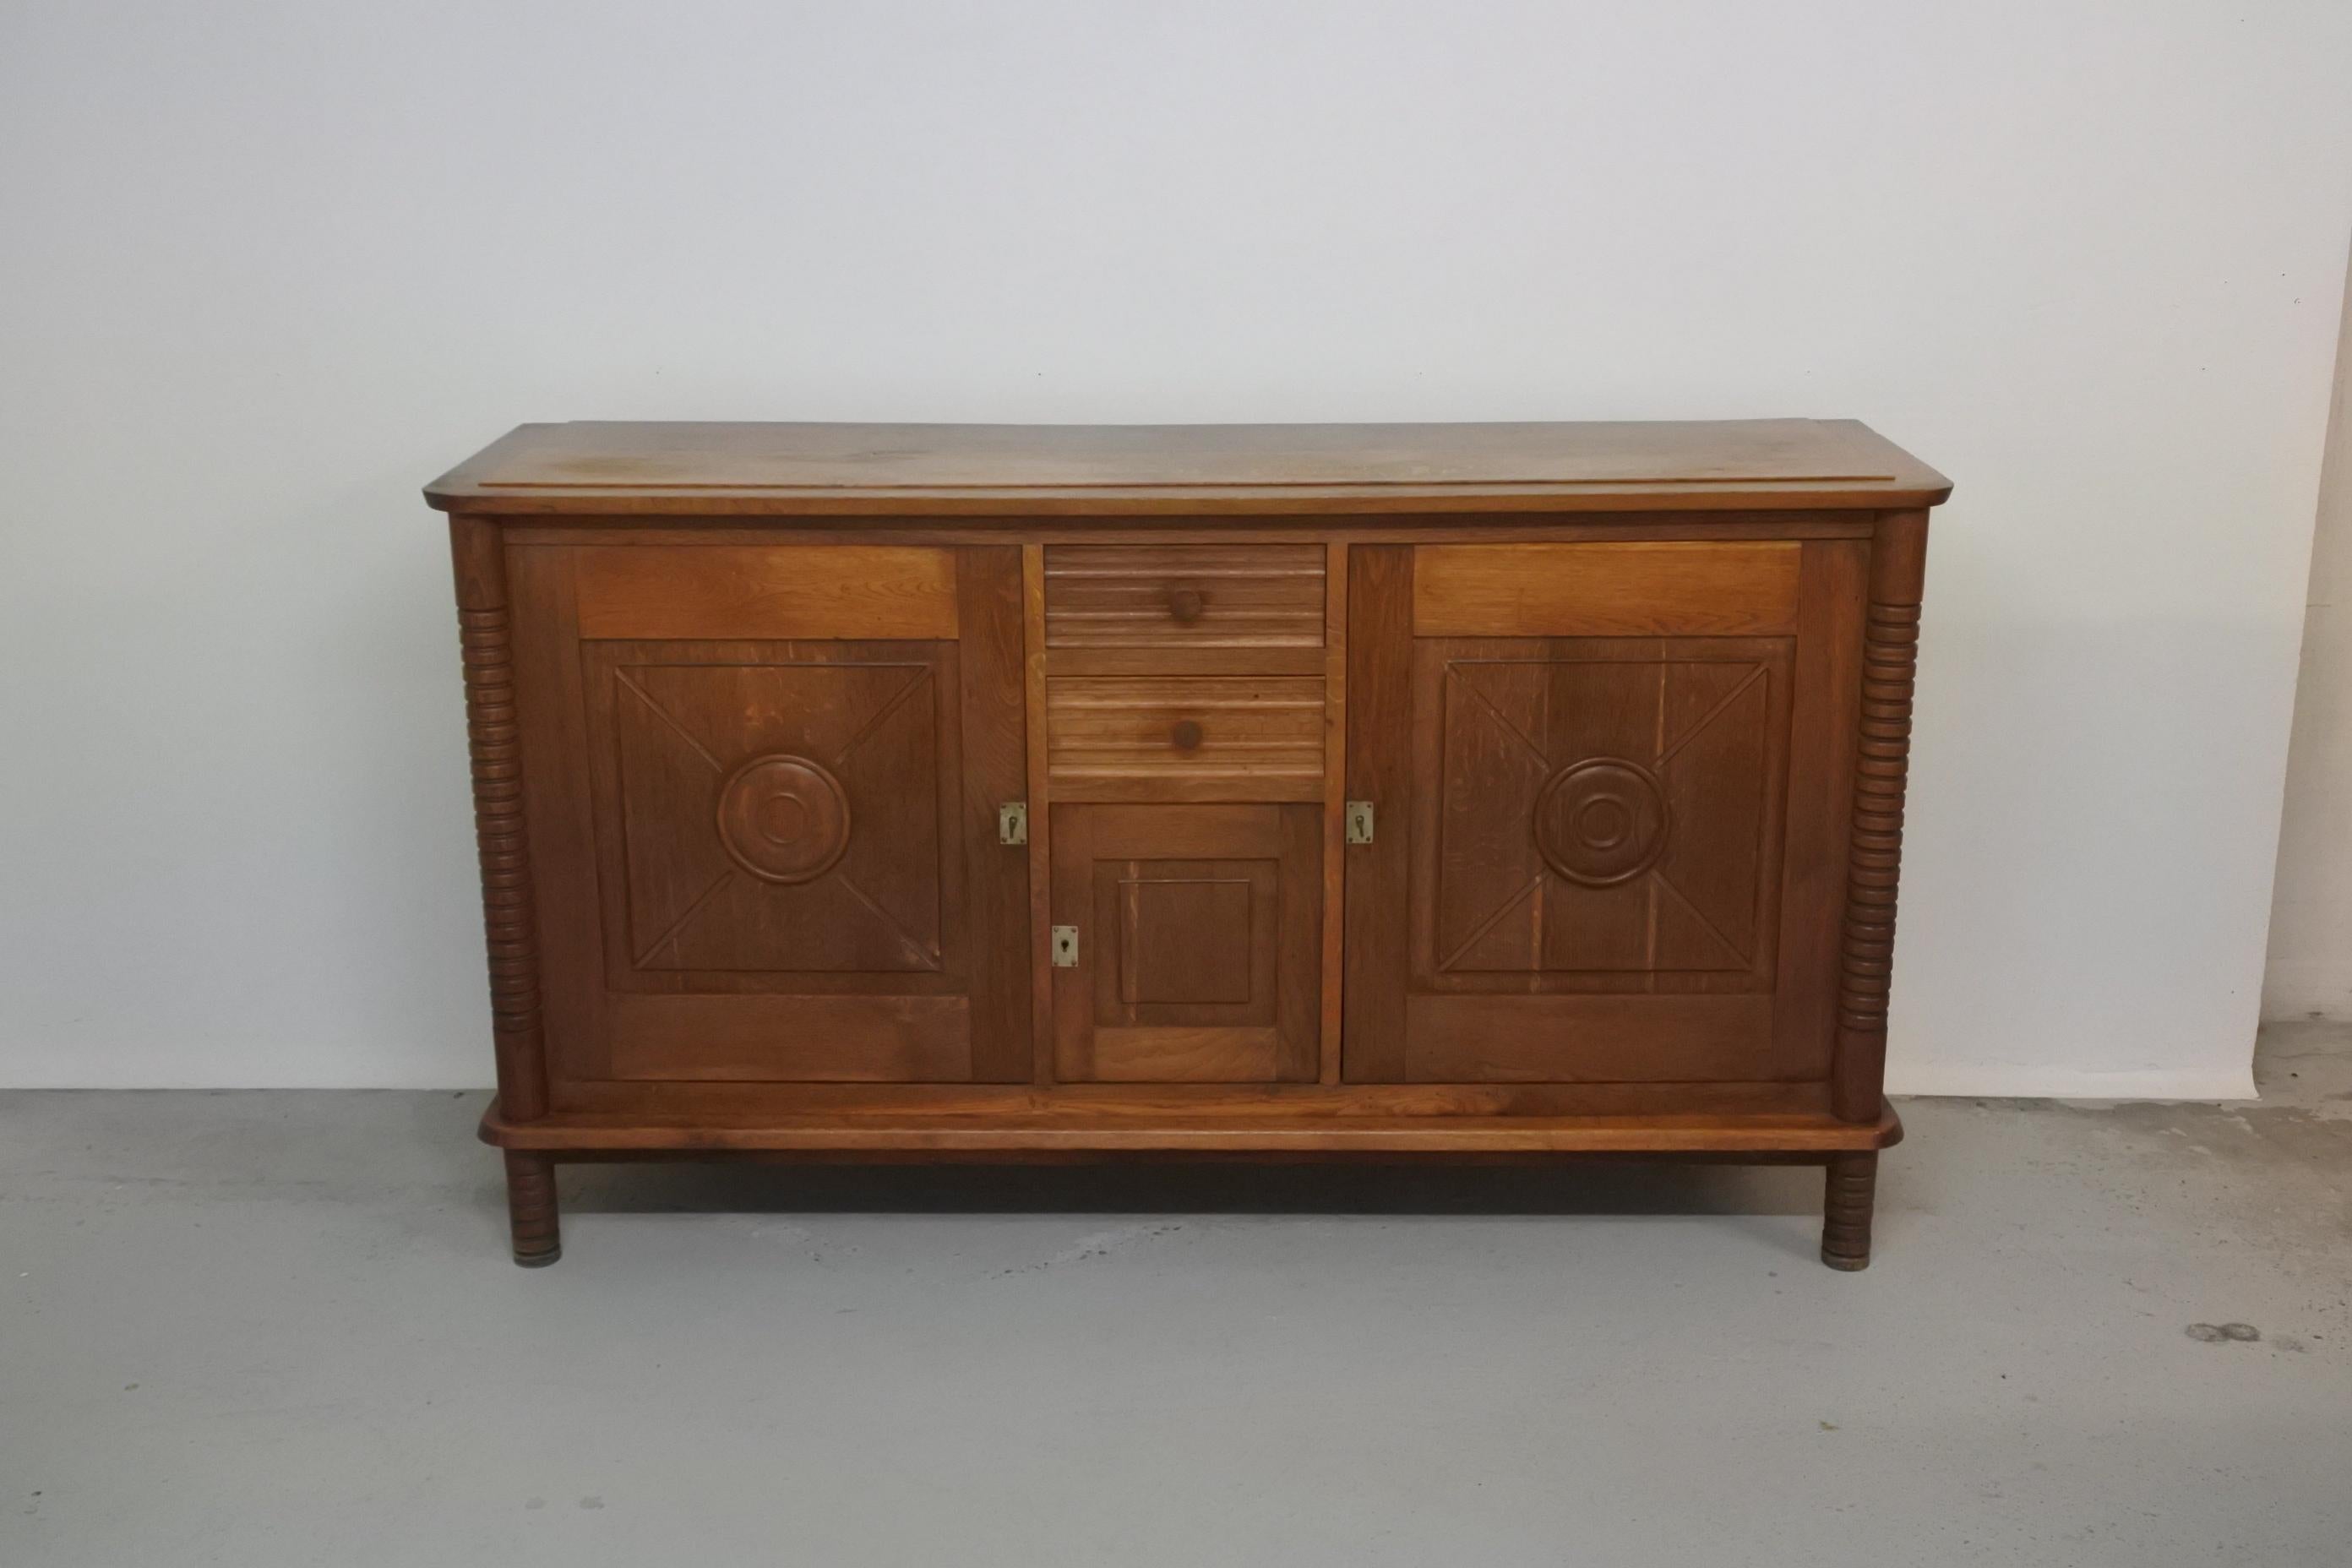 Art Deco sideboard in solid oak by Charles Dudouyt.
Made in France in the 1930s.
Beautiful details and fantastic patina.